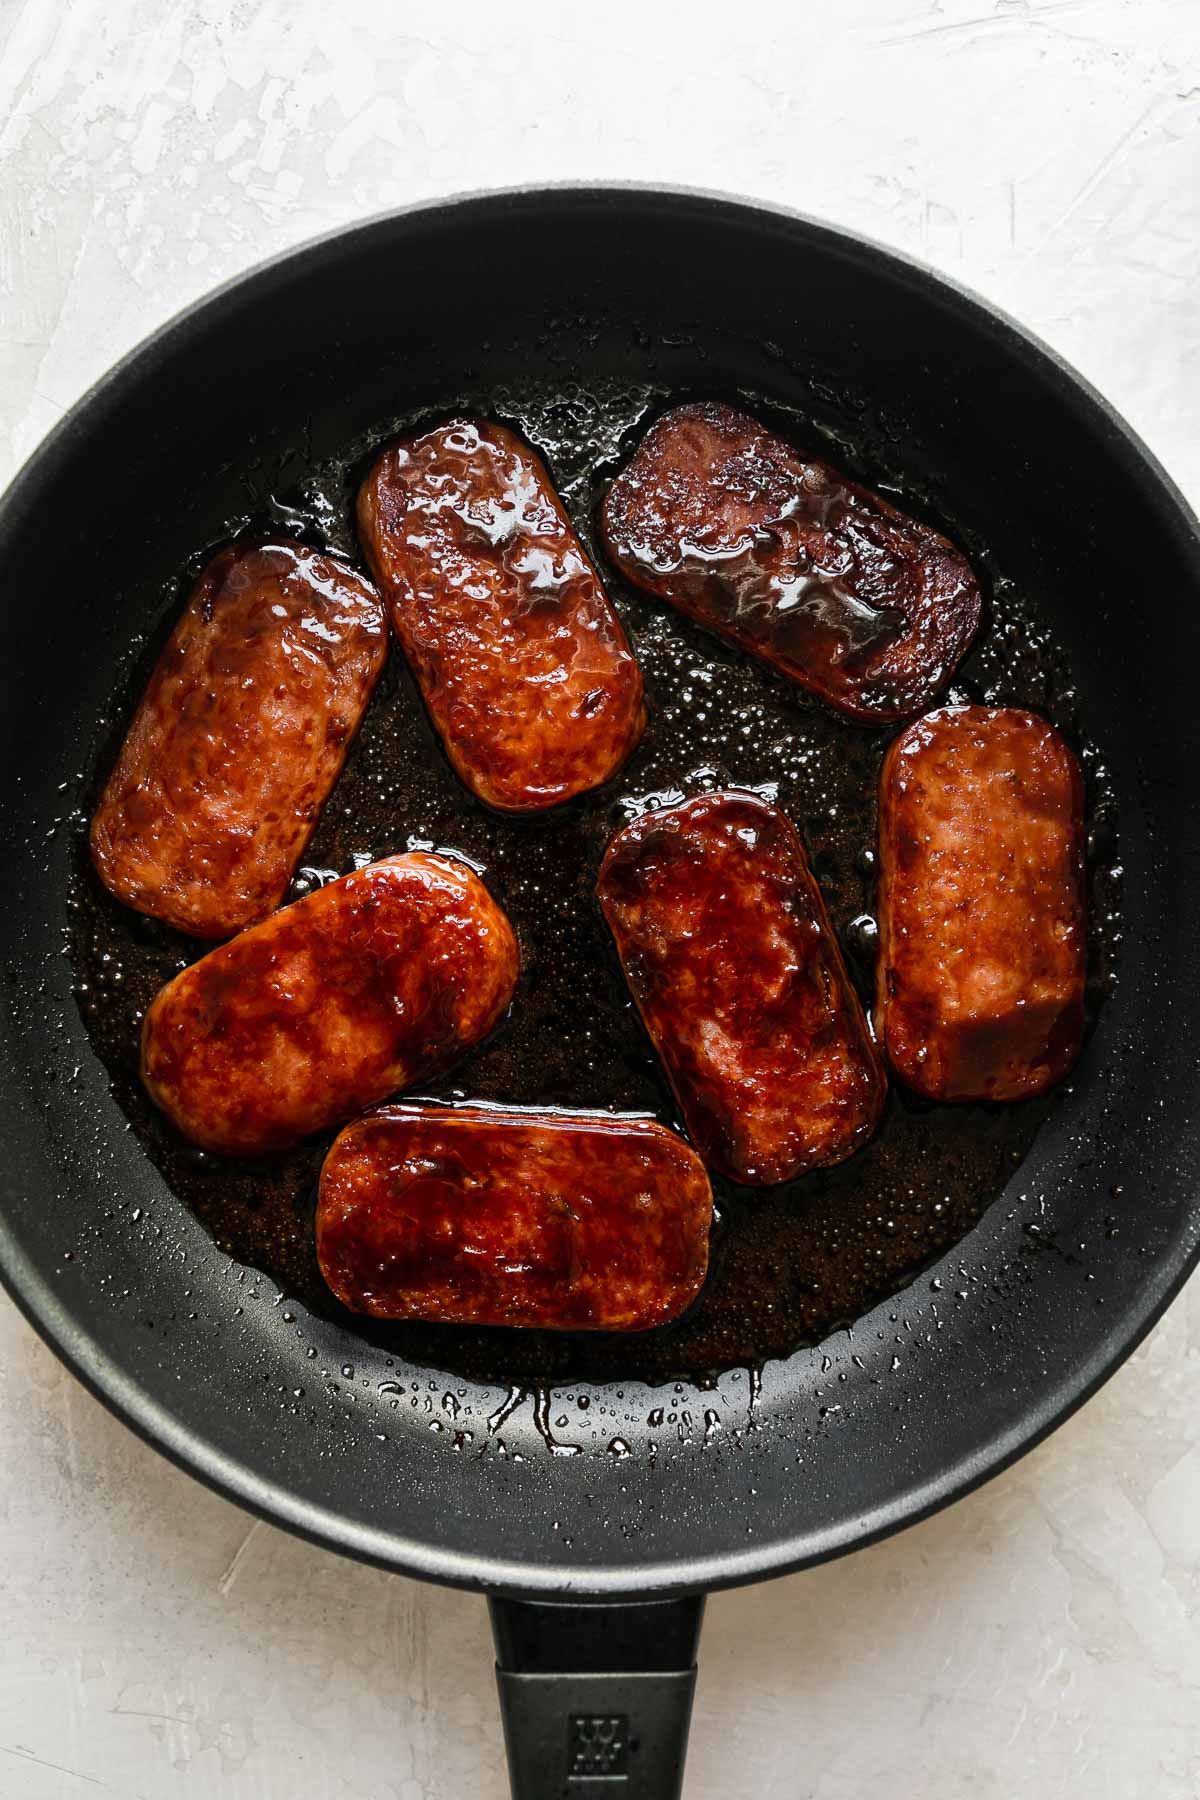 How to make Hawaiian spam musubi, step 3: Pan-fry the Spam & glaze with teriyaki sauce. Seven pieces of pan-fried spam that have been glazed with a homemade teriyaki sauce fill a black non-stick frying pan. The pan sits atop a creamy white textured surface.